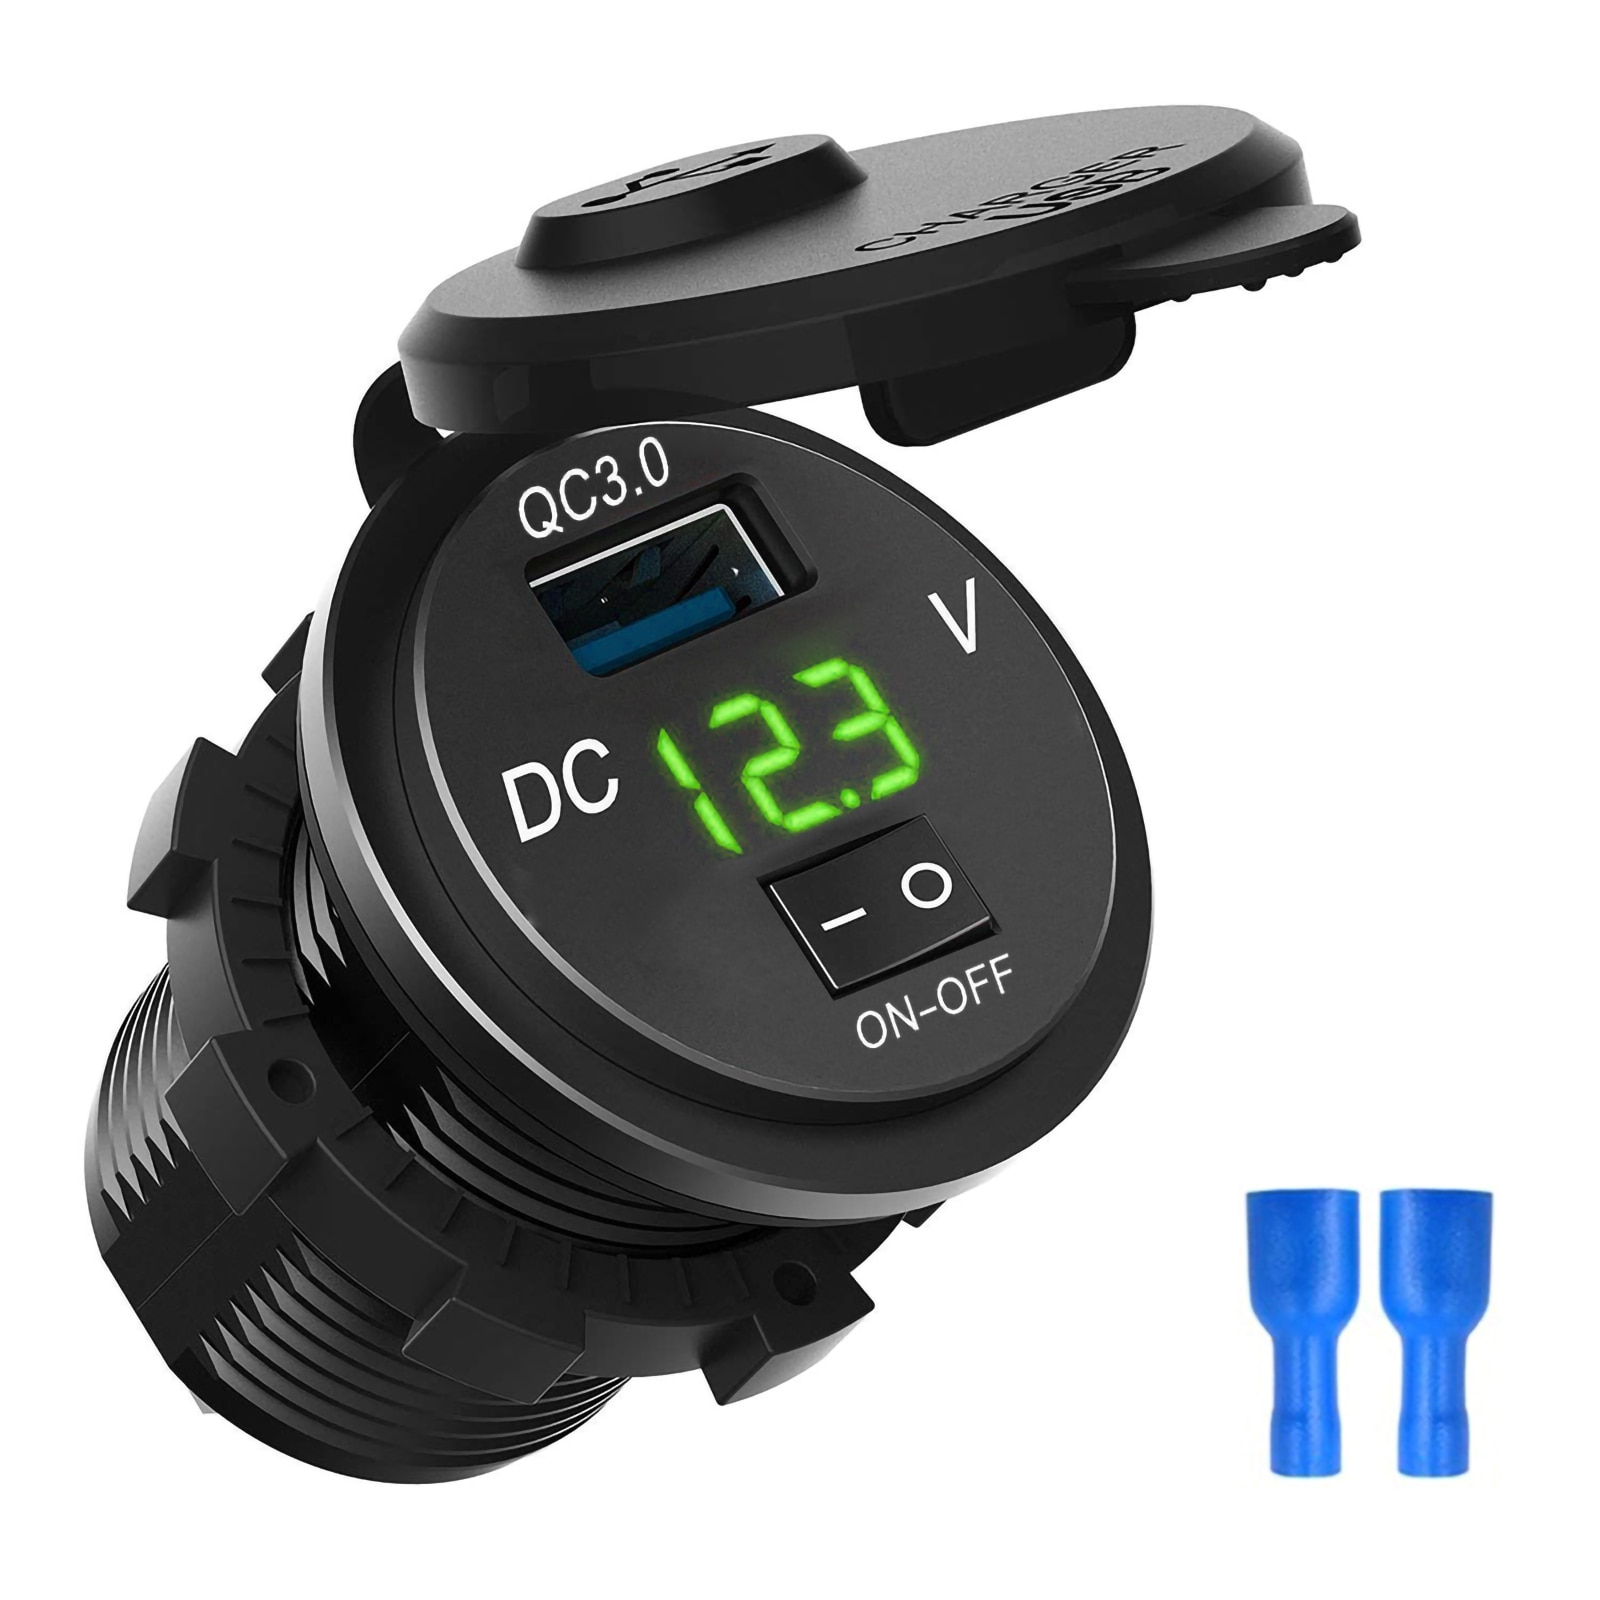 12-24V Quick Charge 3.0 Usb Charger 5V 3.1A Led Display Voltmeter Auto QC3.0 Quick Charge Charger voor Auto Boot Motorfiets